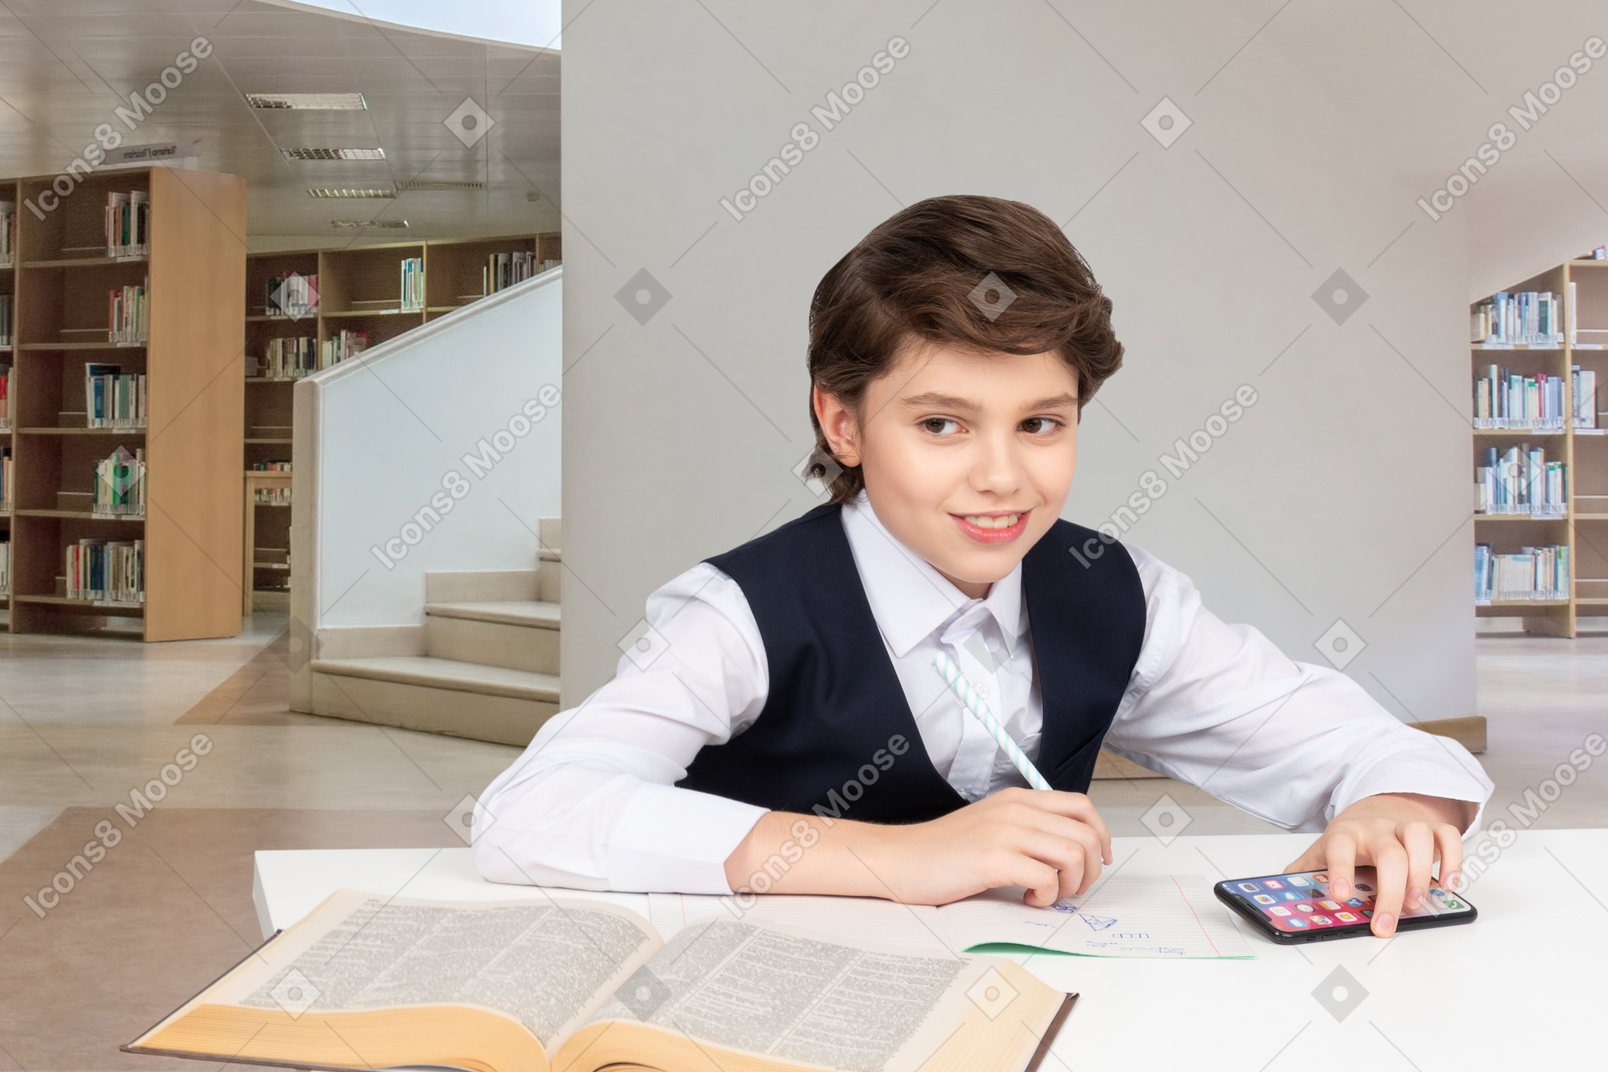 Male school student studying